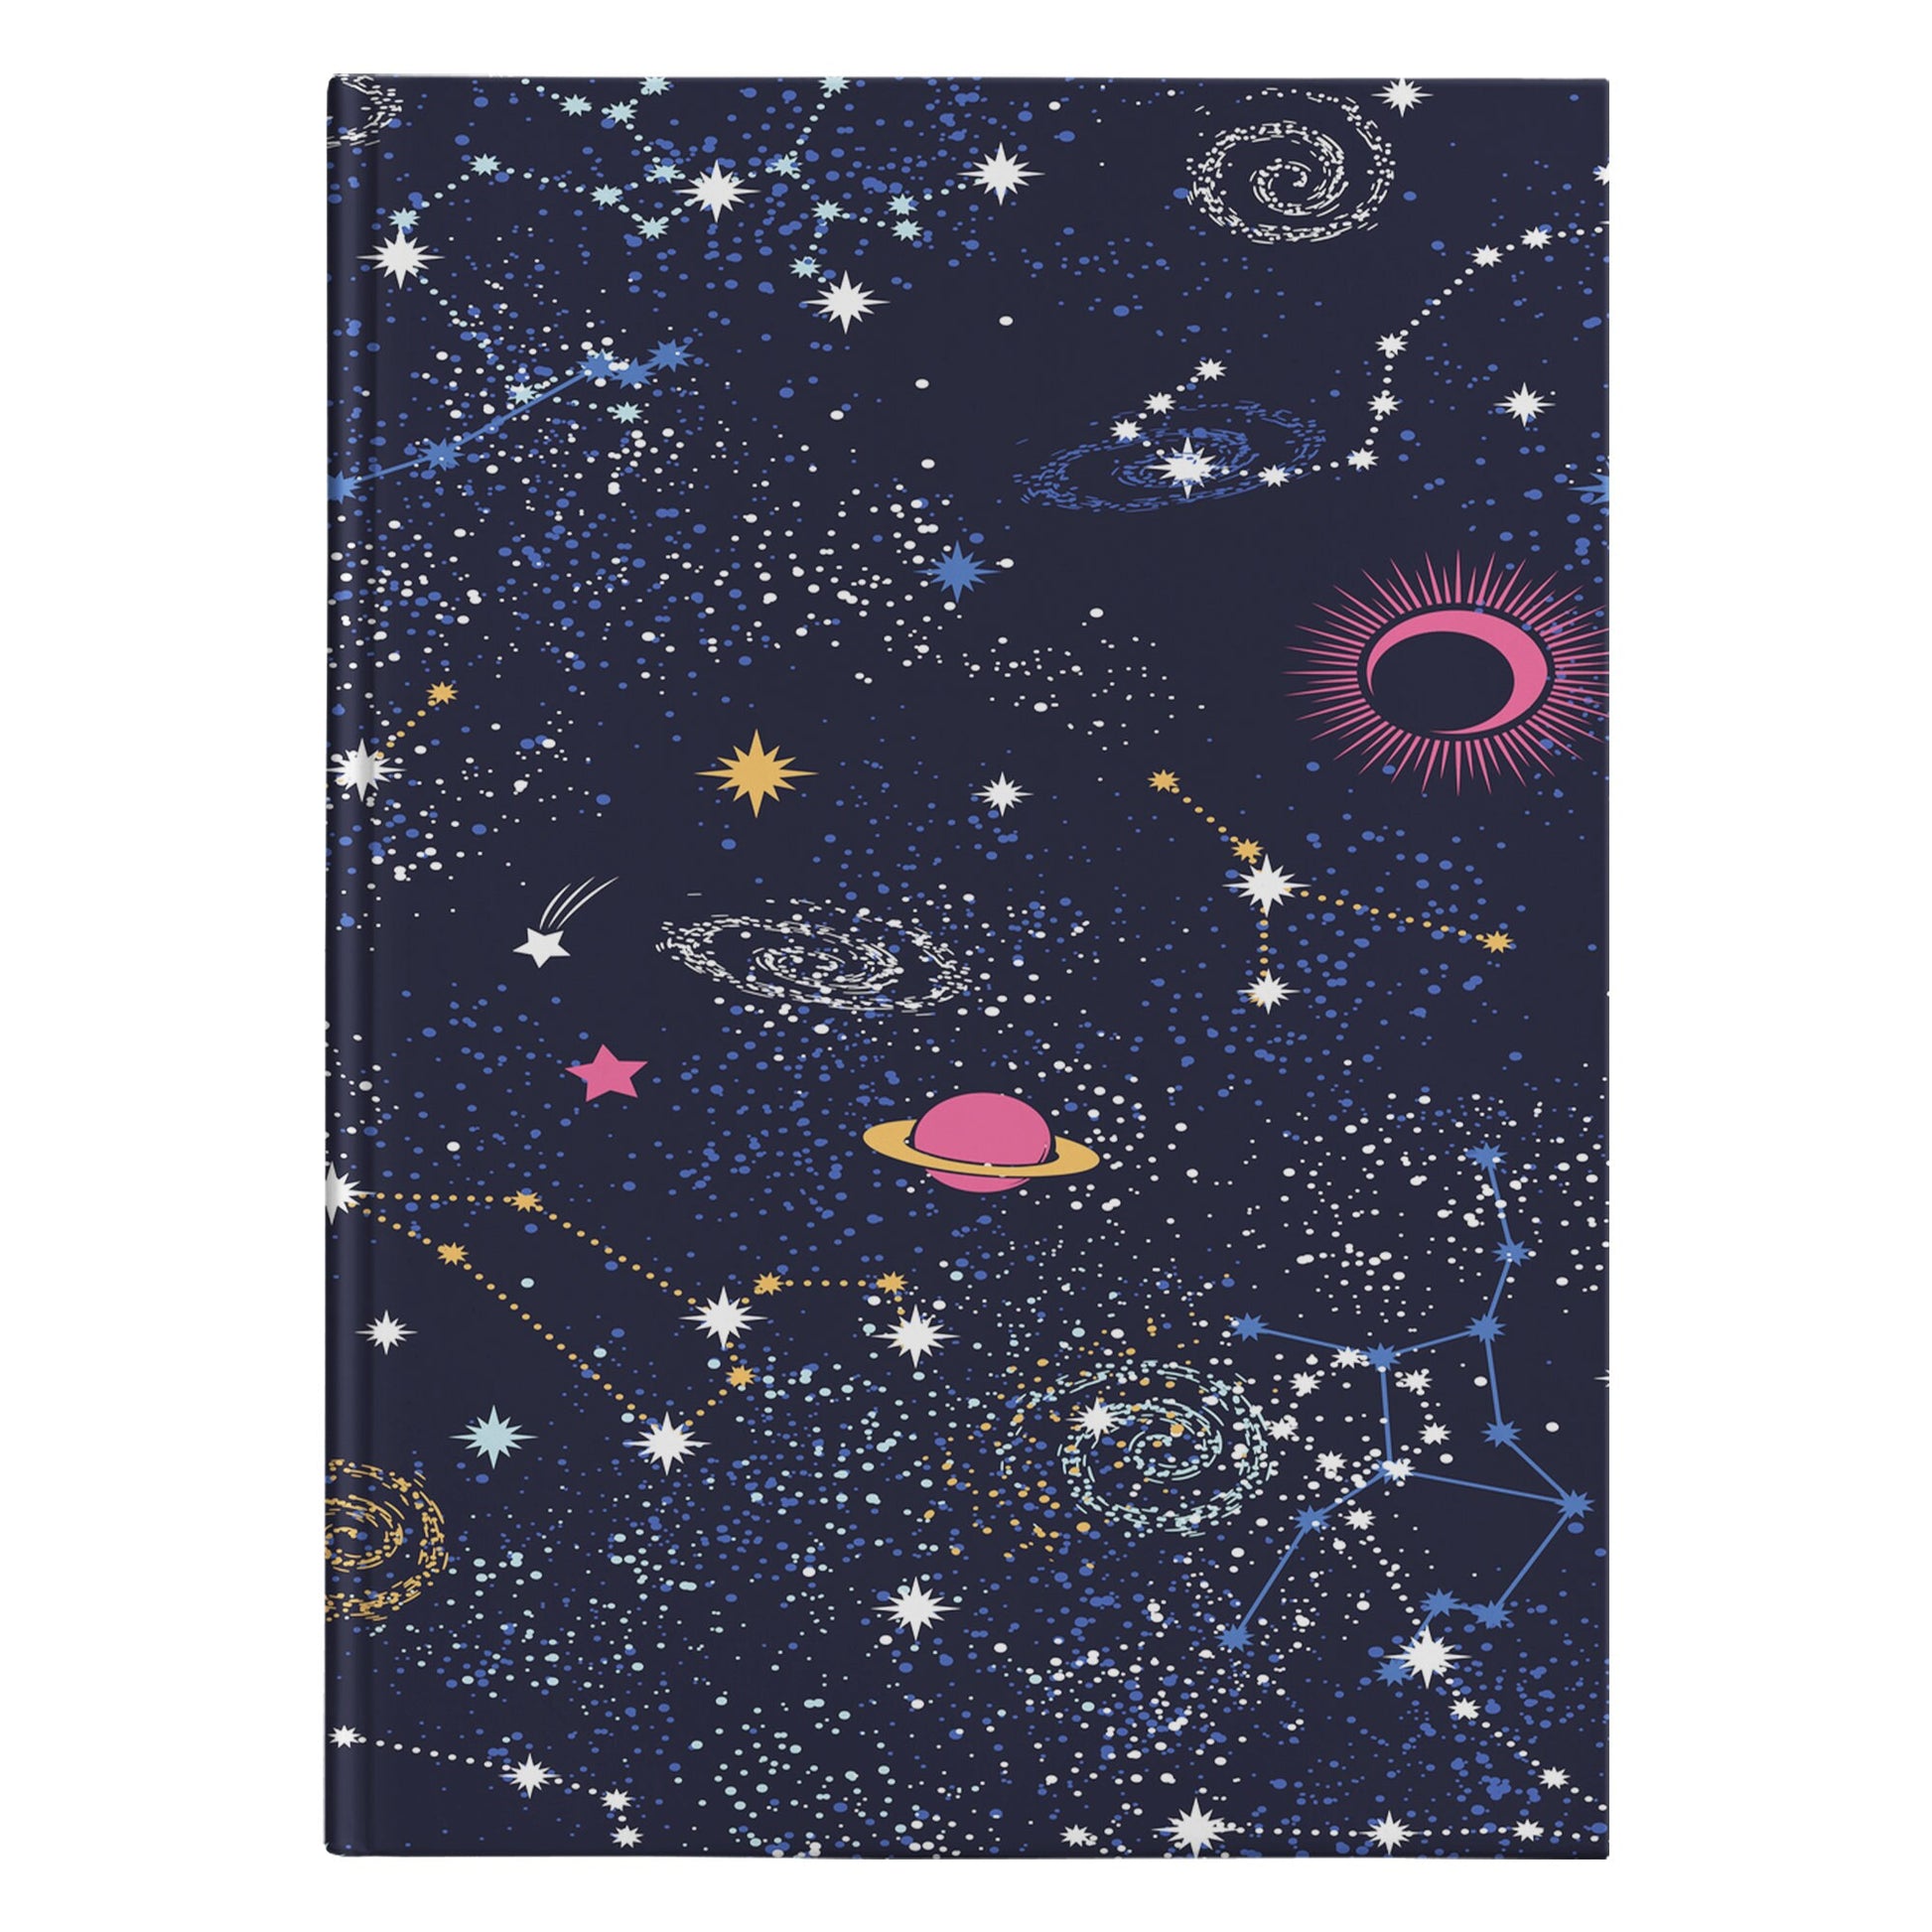 Space Hardcover Journal celestial diary stars Notepad galaxy spiral Notebook kids diary Cheap Gifts star constellations childrens notebooks